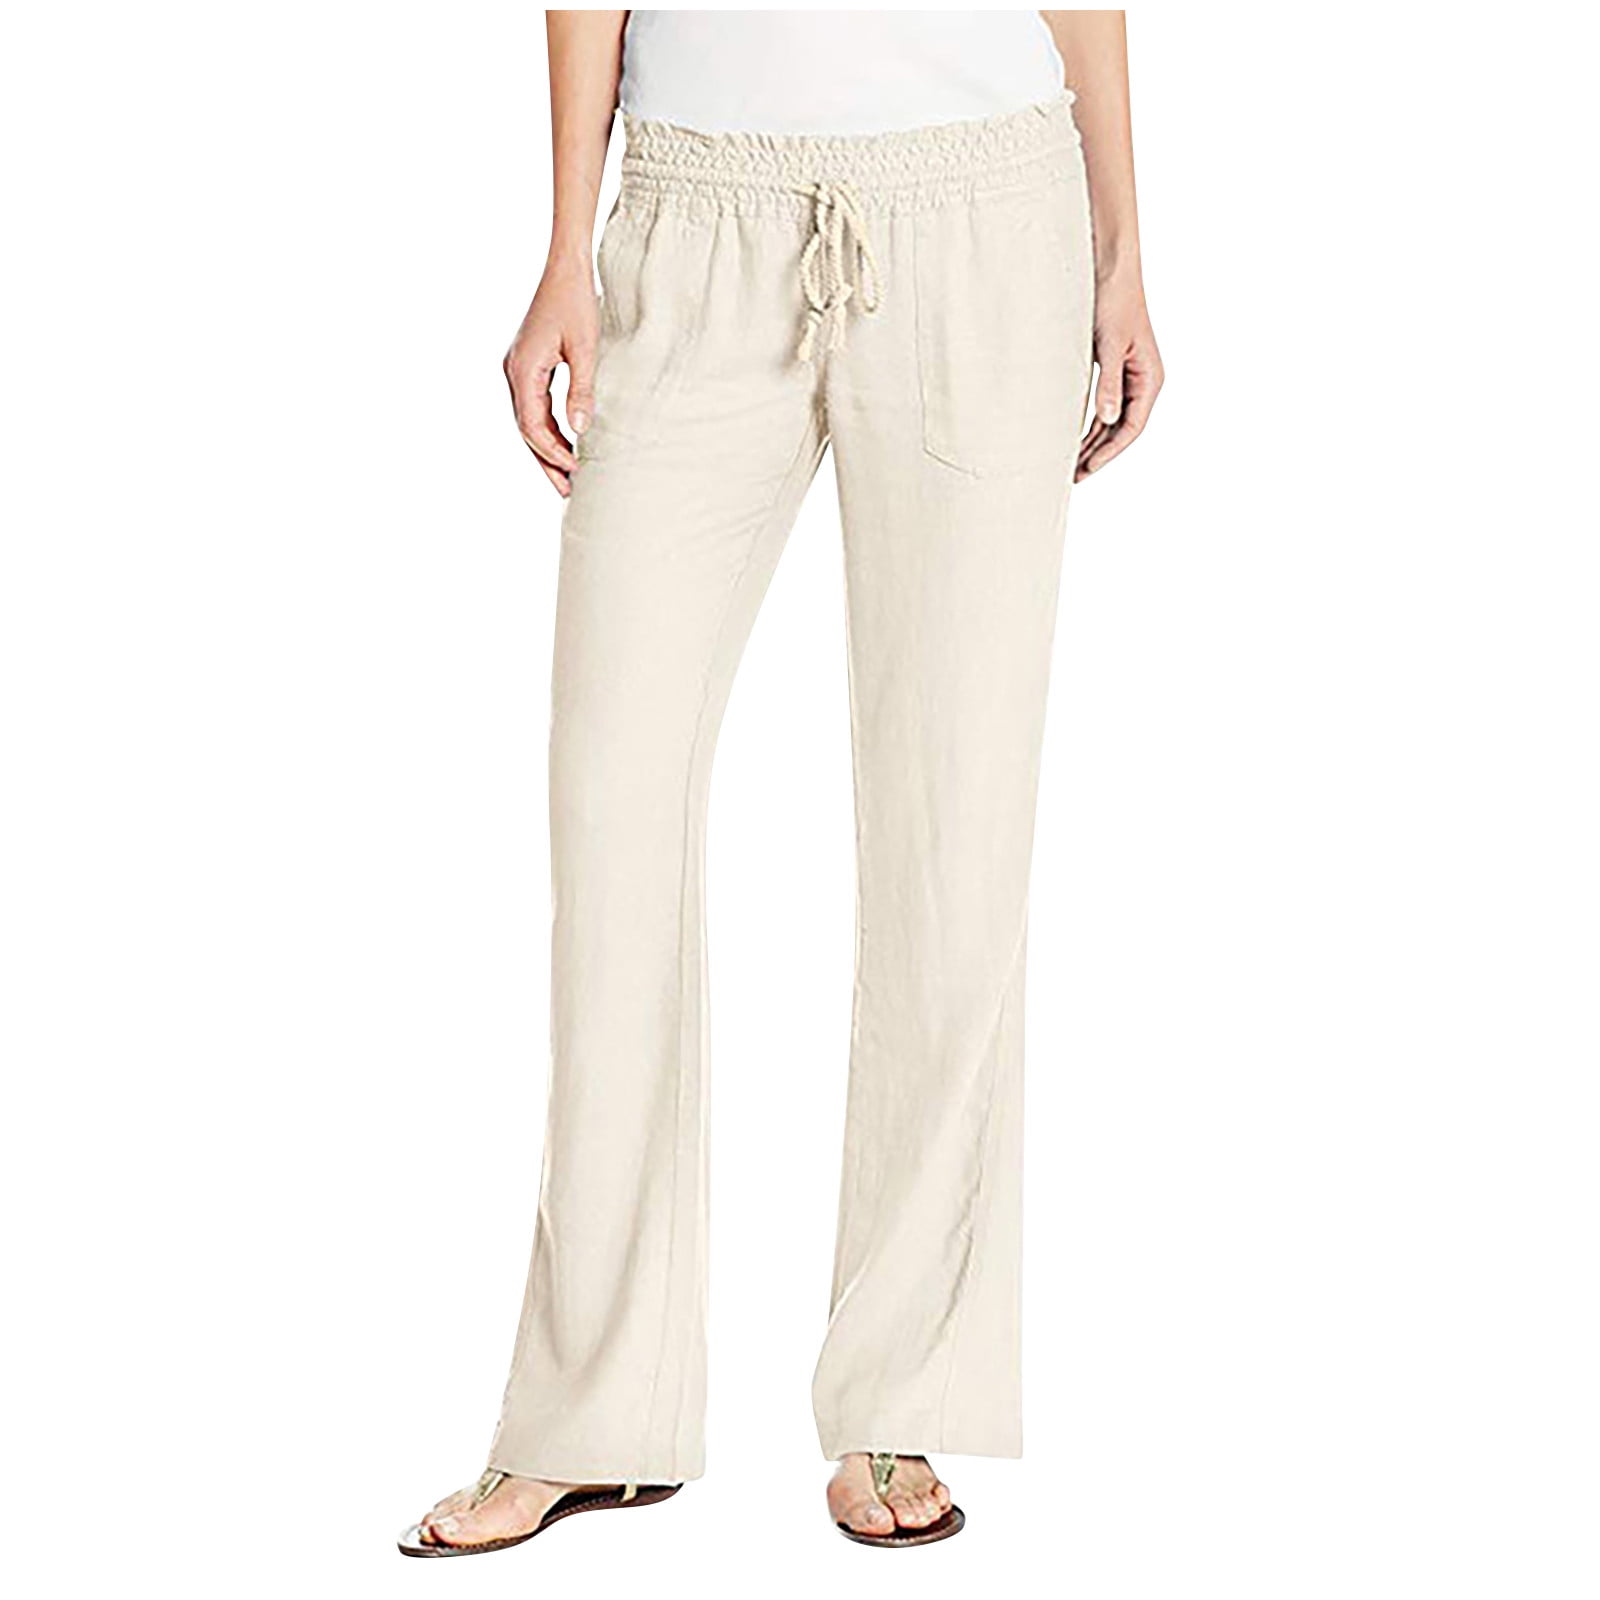 KIHOUT Women's Solid Color Casual Loose Trouser Wide Ninth Pants Cotton And  Linen Pants 